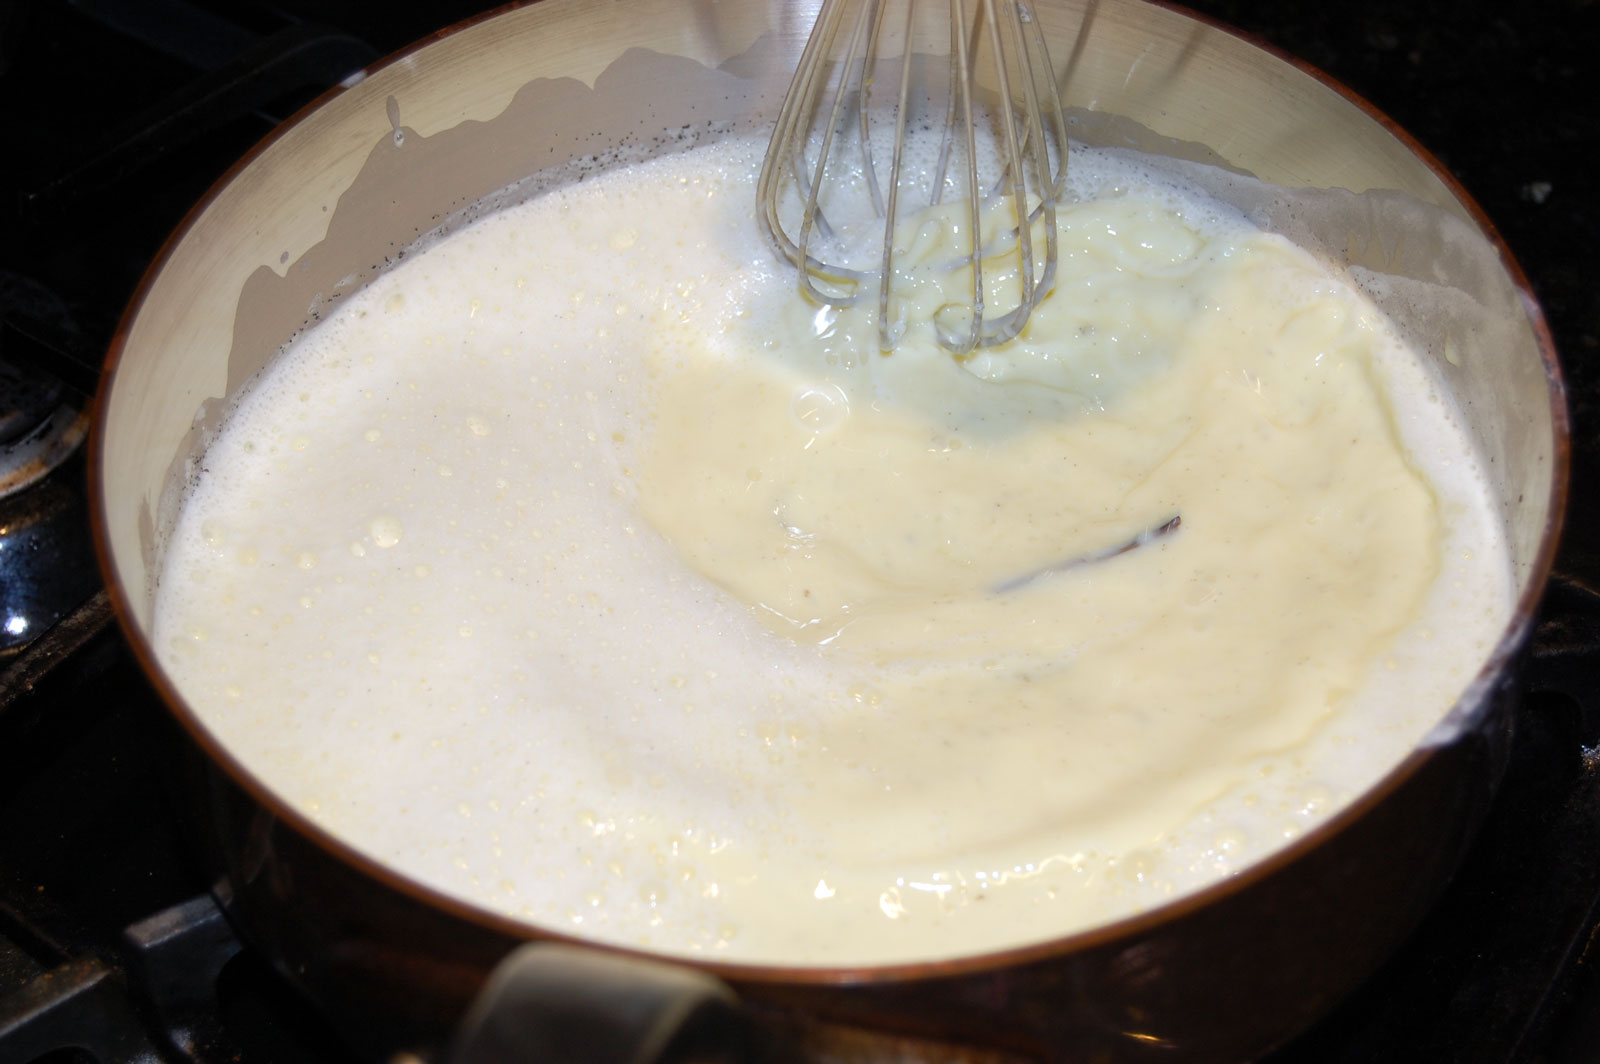 Once Mixed Together Put Back on High Heat and Whisk Constantly Until Mixture Starts to Boil and Thicken 3-to-4 Minutes